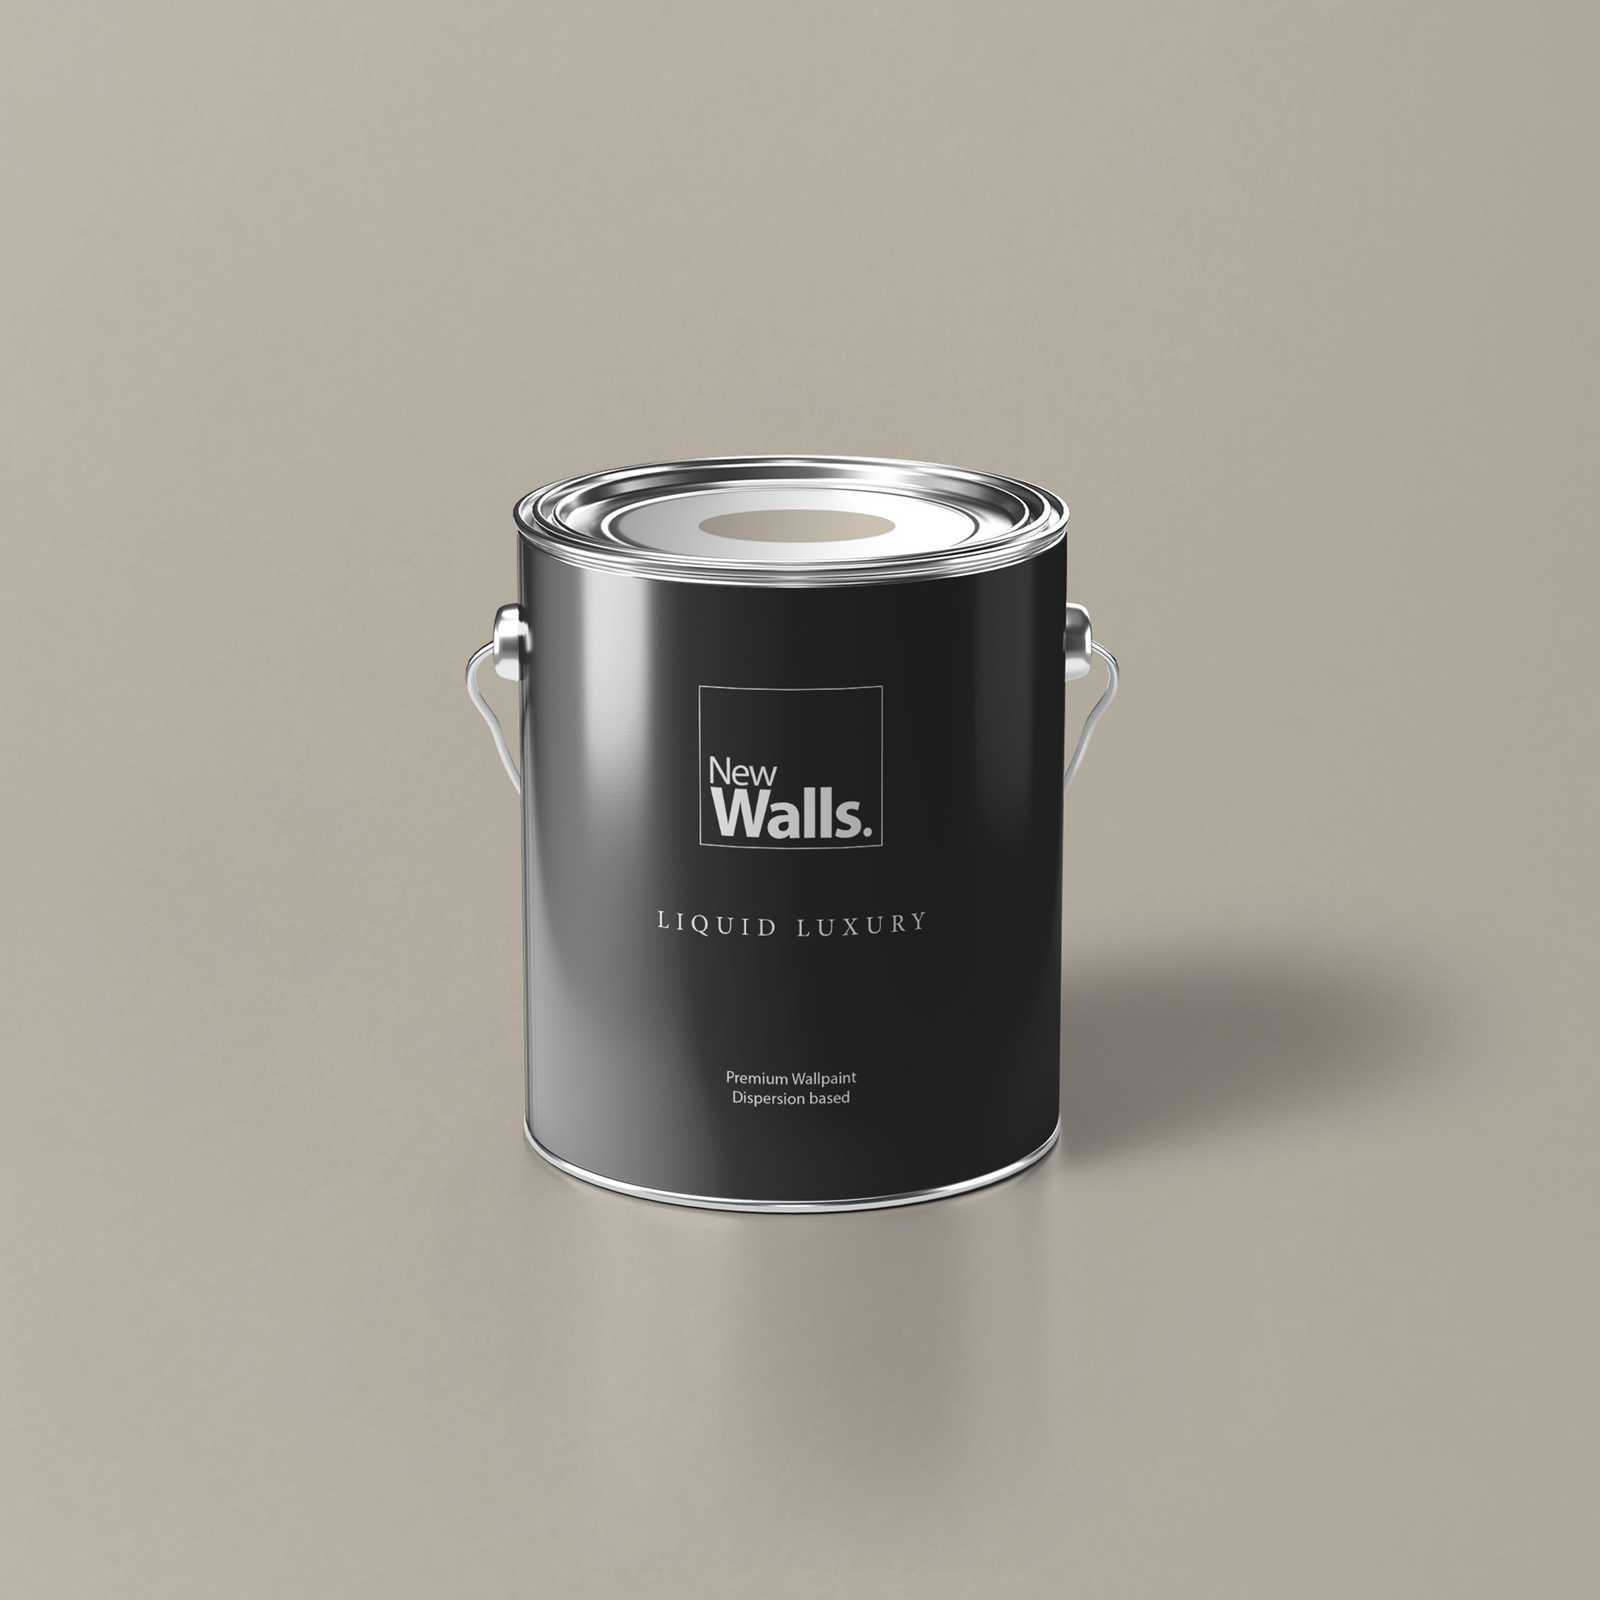 Premium Wall Paint cosy taupe »Talented calm taupe« NW700 – 2,5 litre
